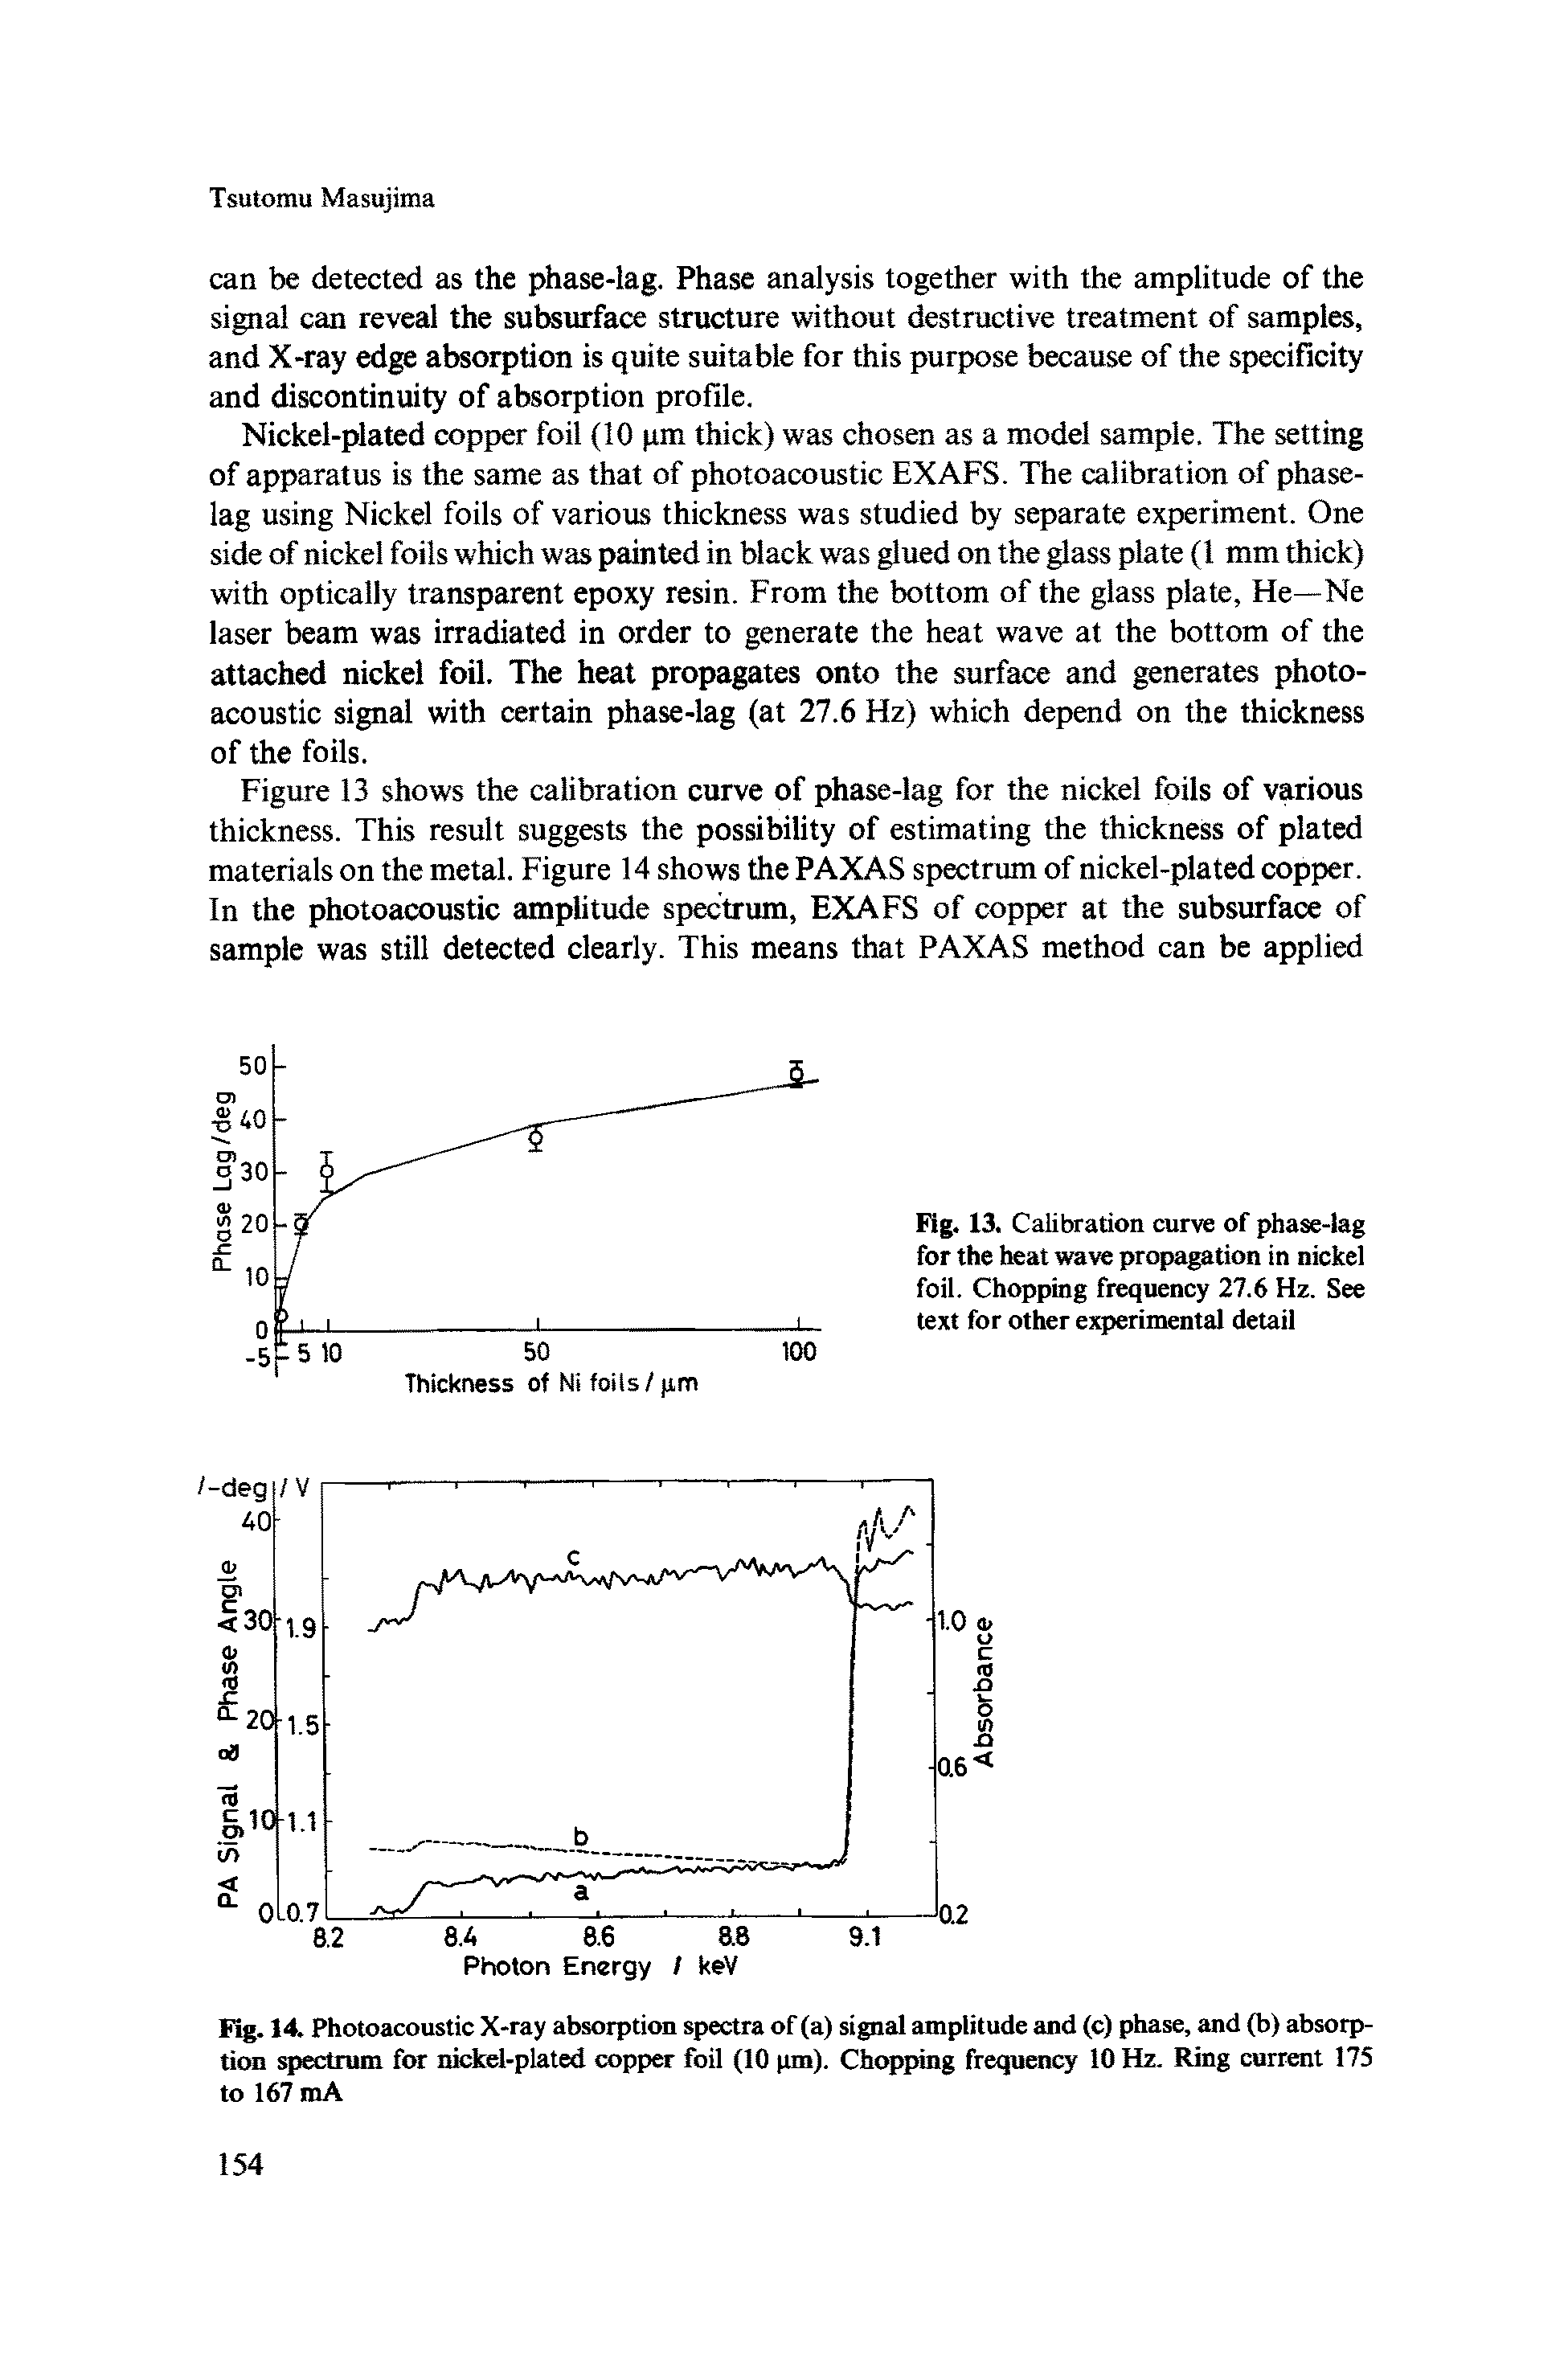 Fig. 13. Calibration curve of phase-tag for the heat wave propagation in nickel foil. Chopping frequency 27.6 Hz. See text for other experimental detail...